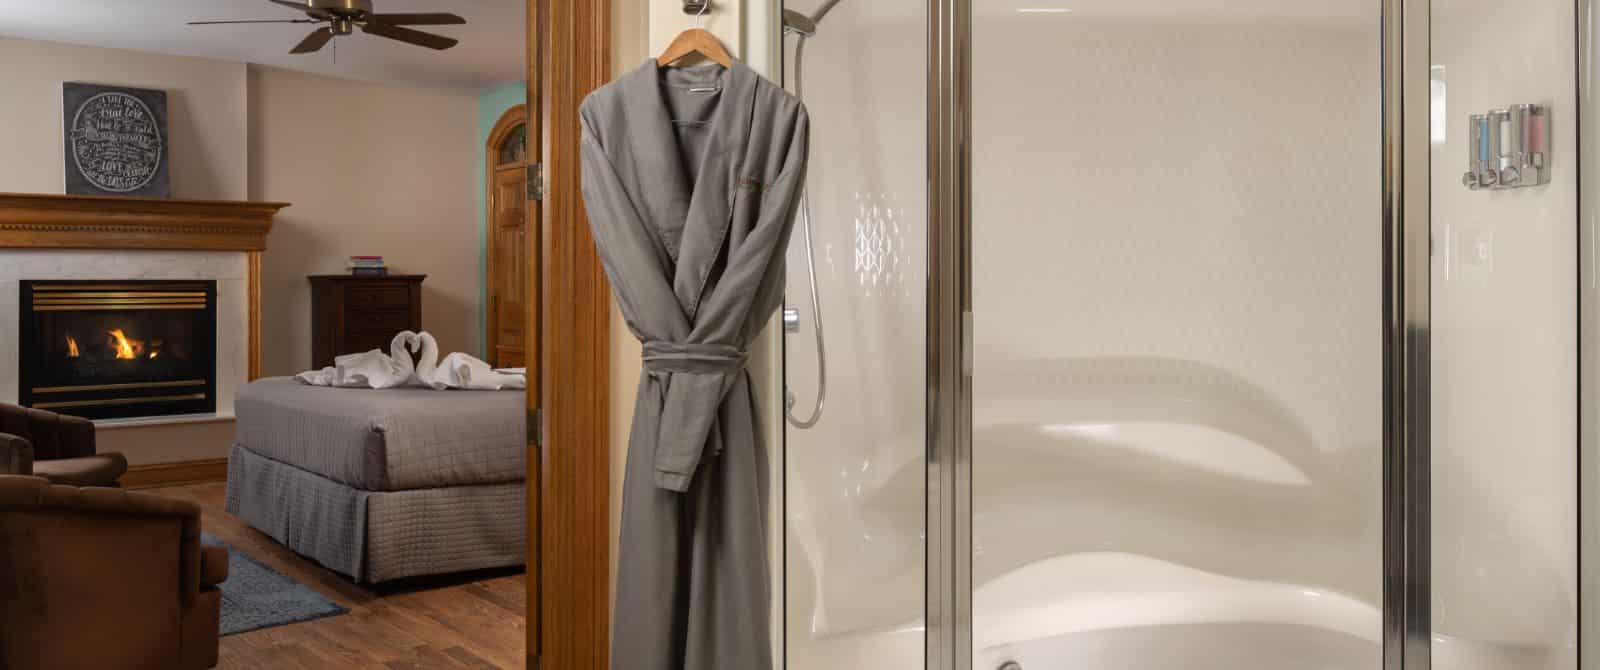 Large walkin shower, gray robe hanging nearby, and view into bedroom with cream walls, wooden flooring, fireplace, and gray bedding